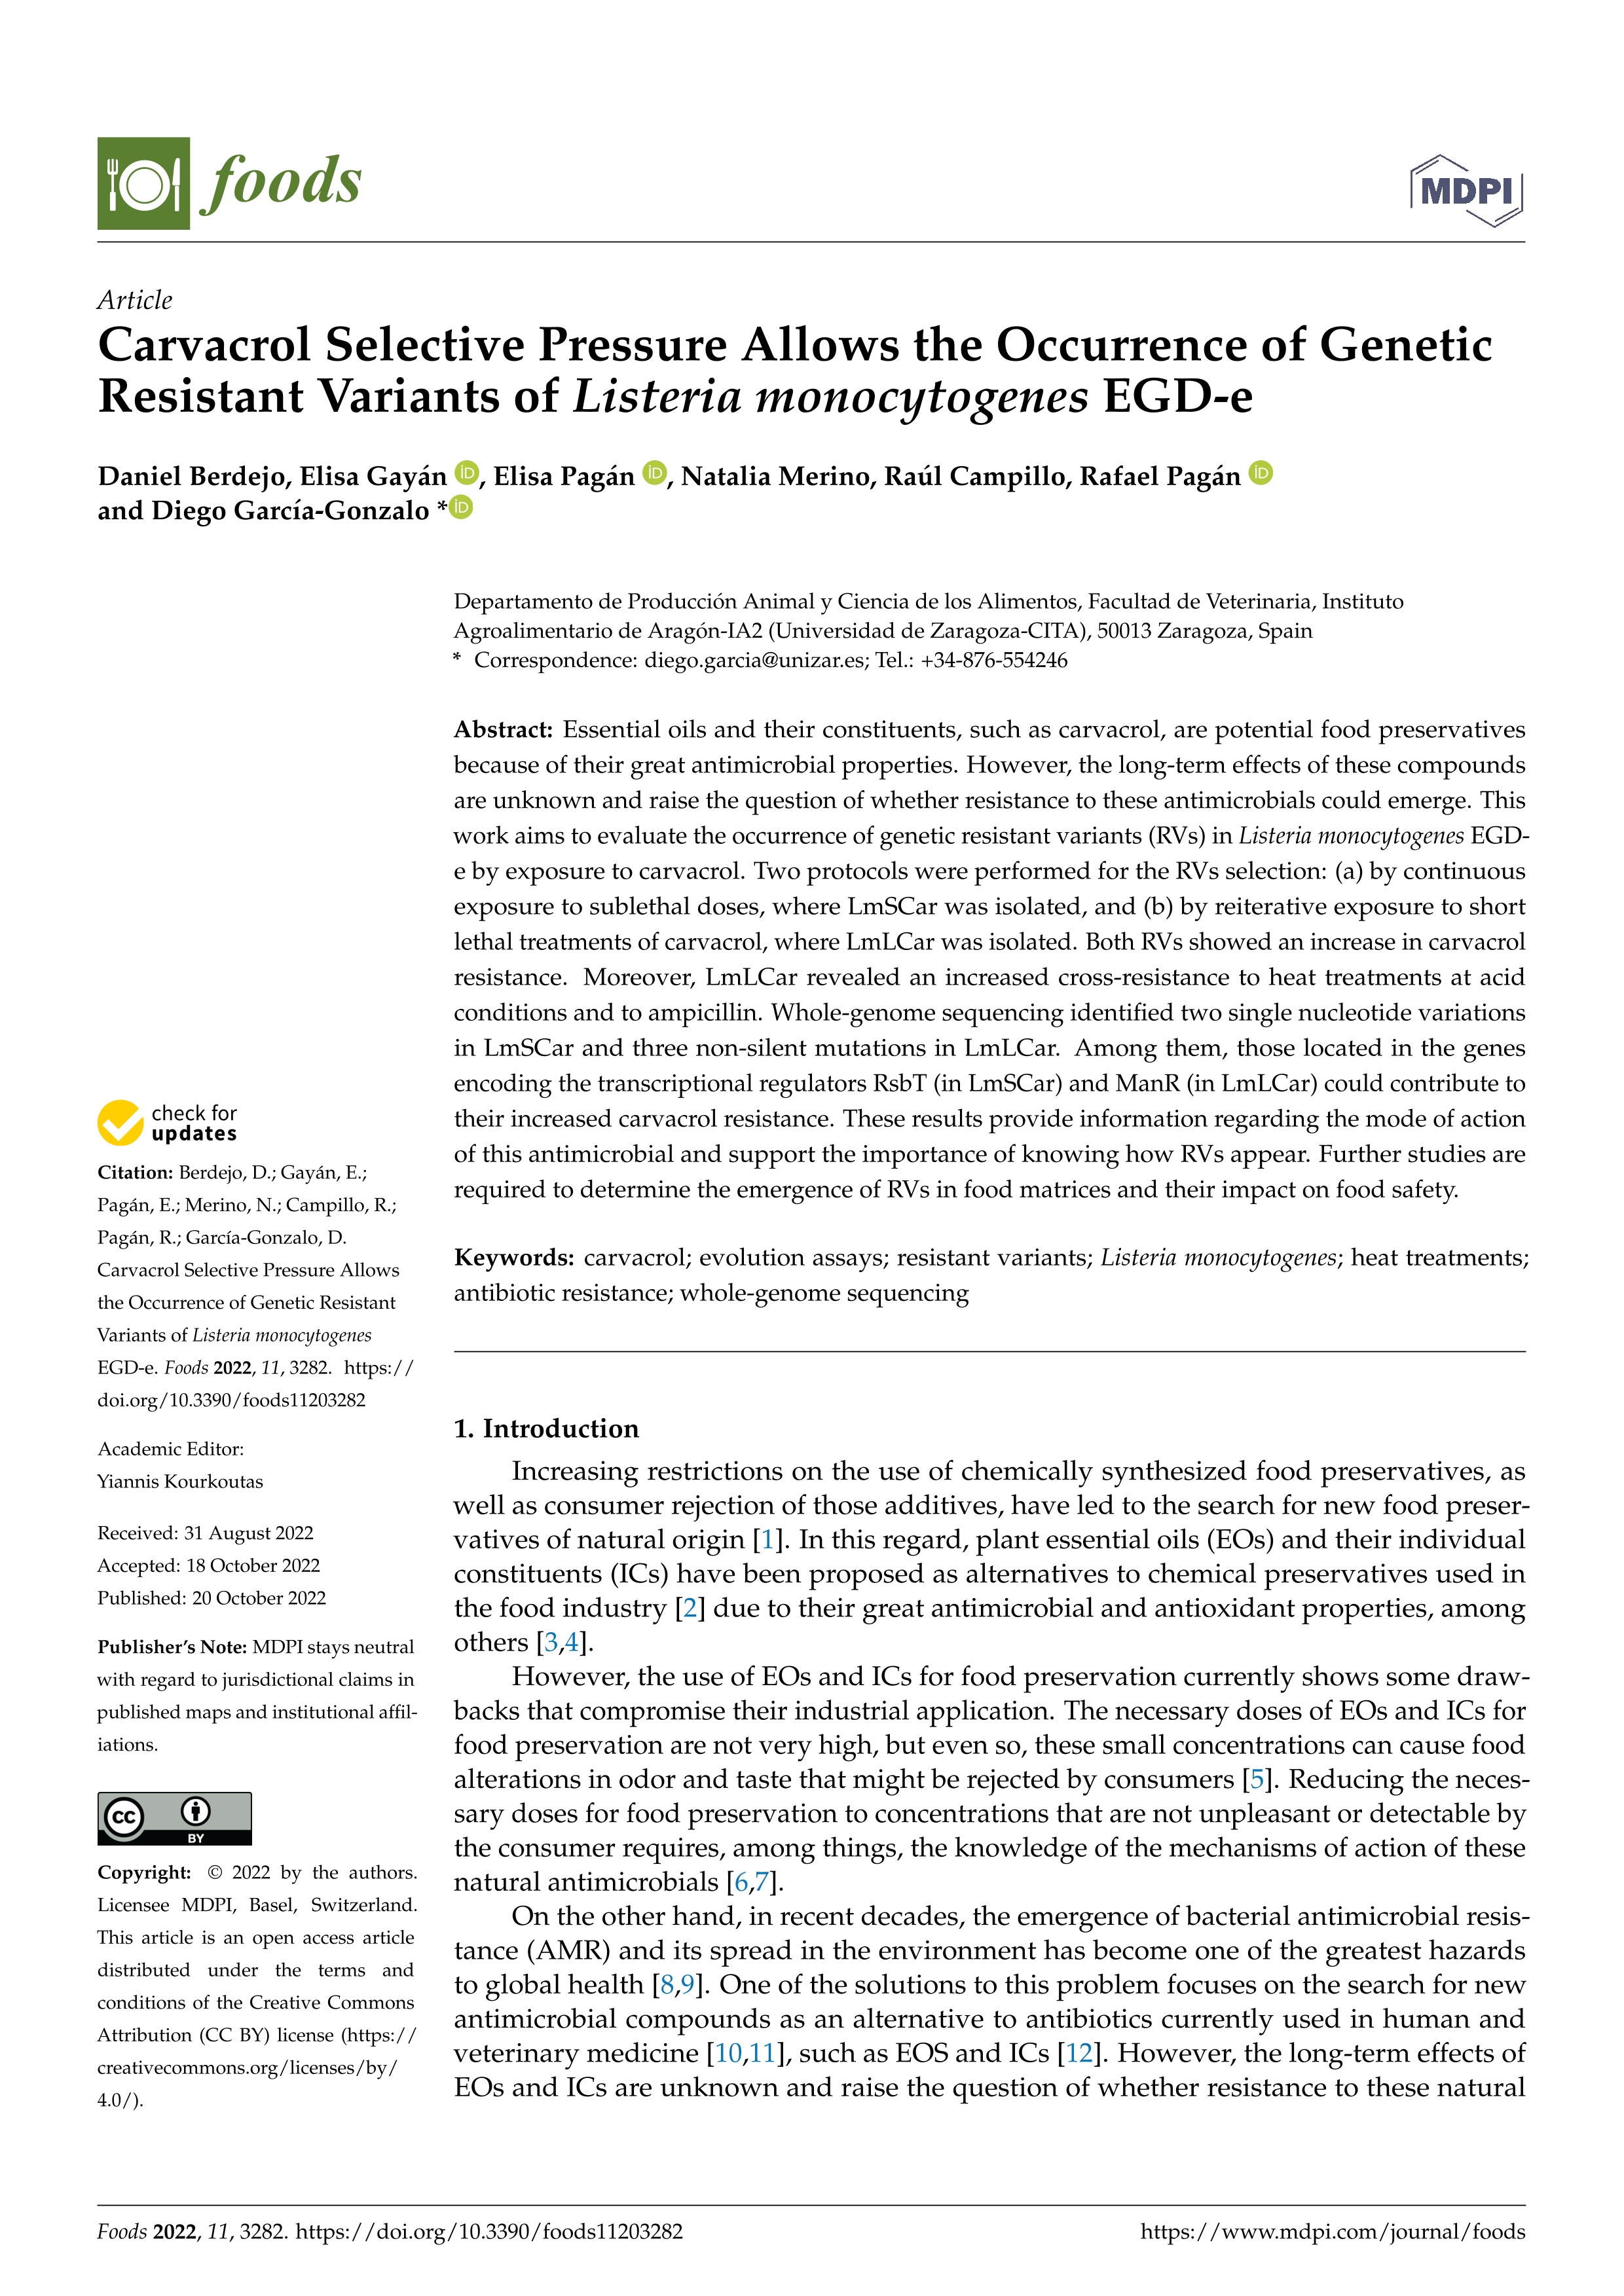 Carvacrol selective pressure allows the occurrence of genetic resistant variants of Listeria monocytogenes EGD-e